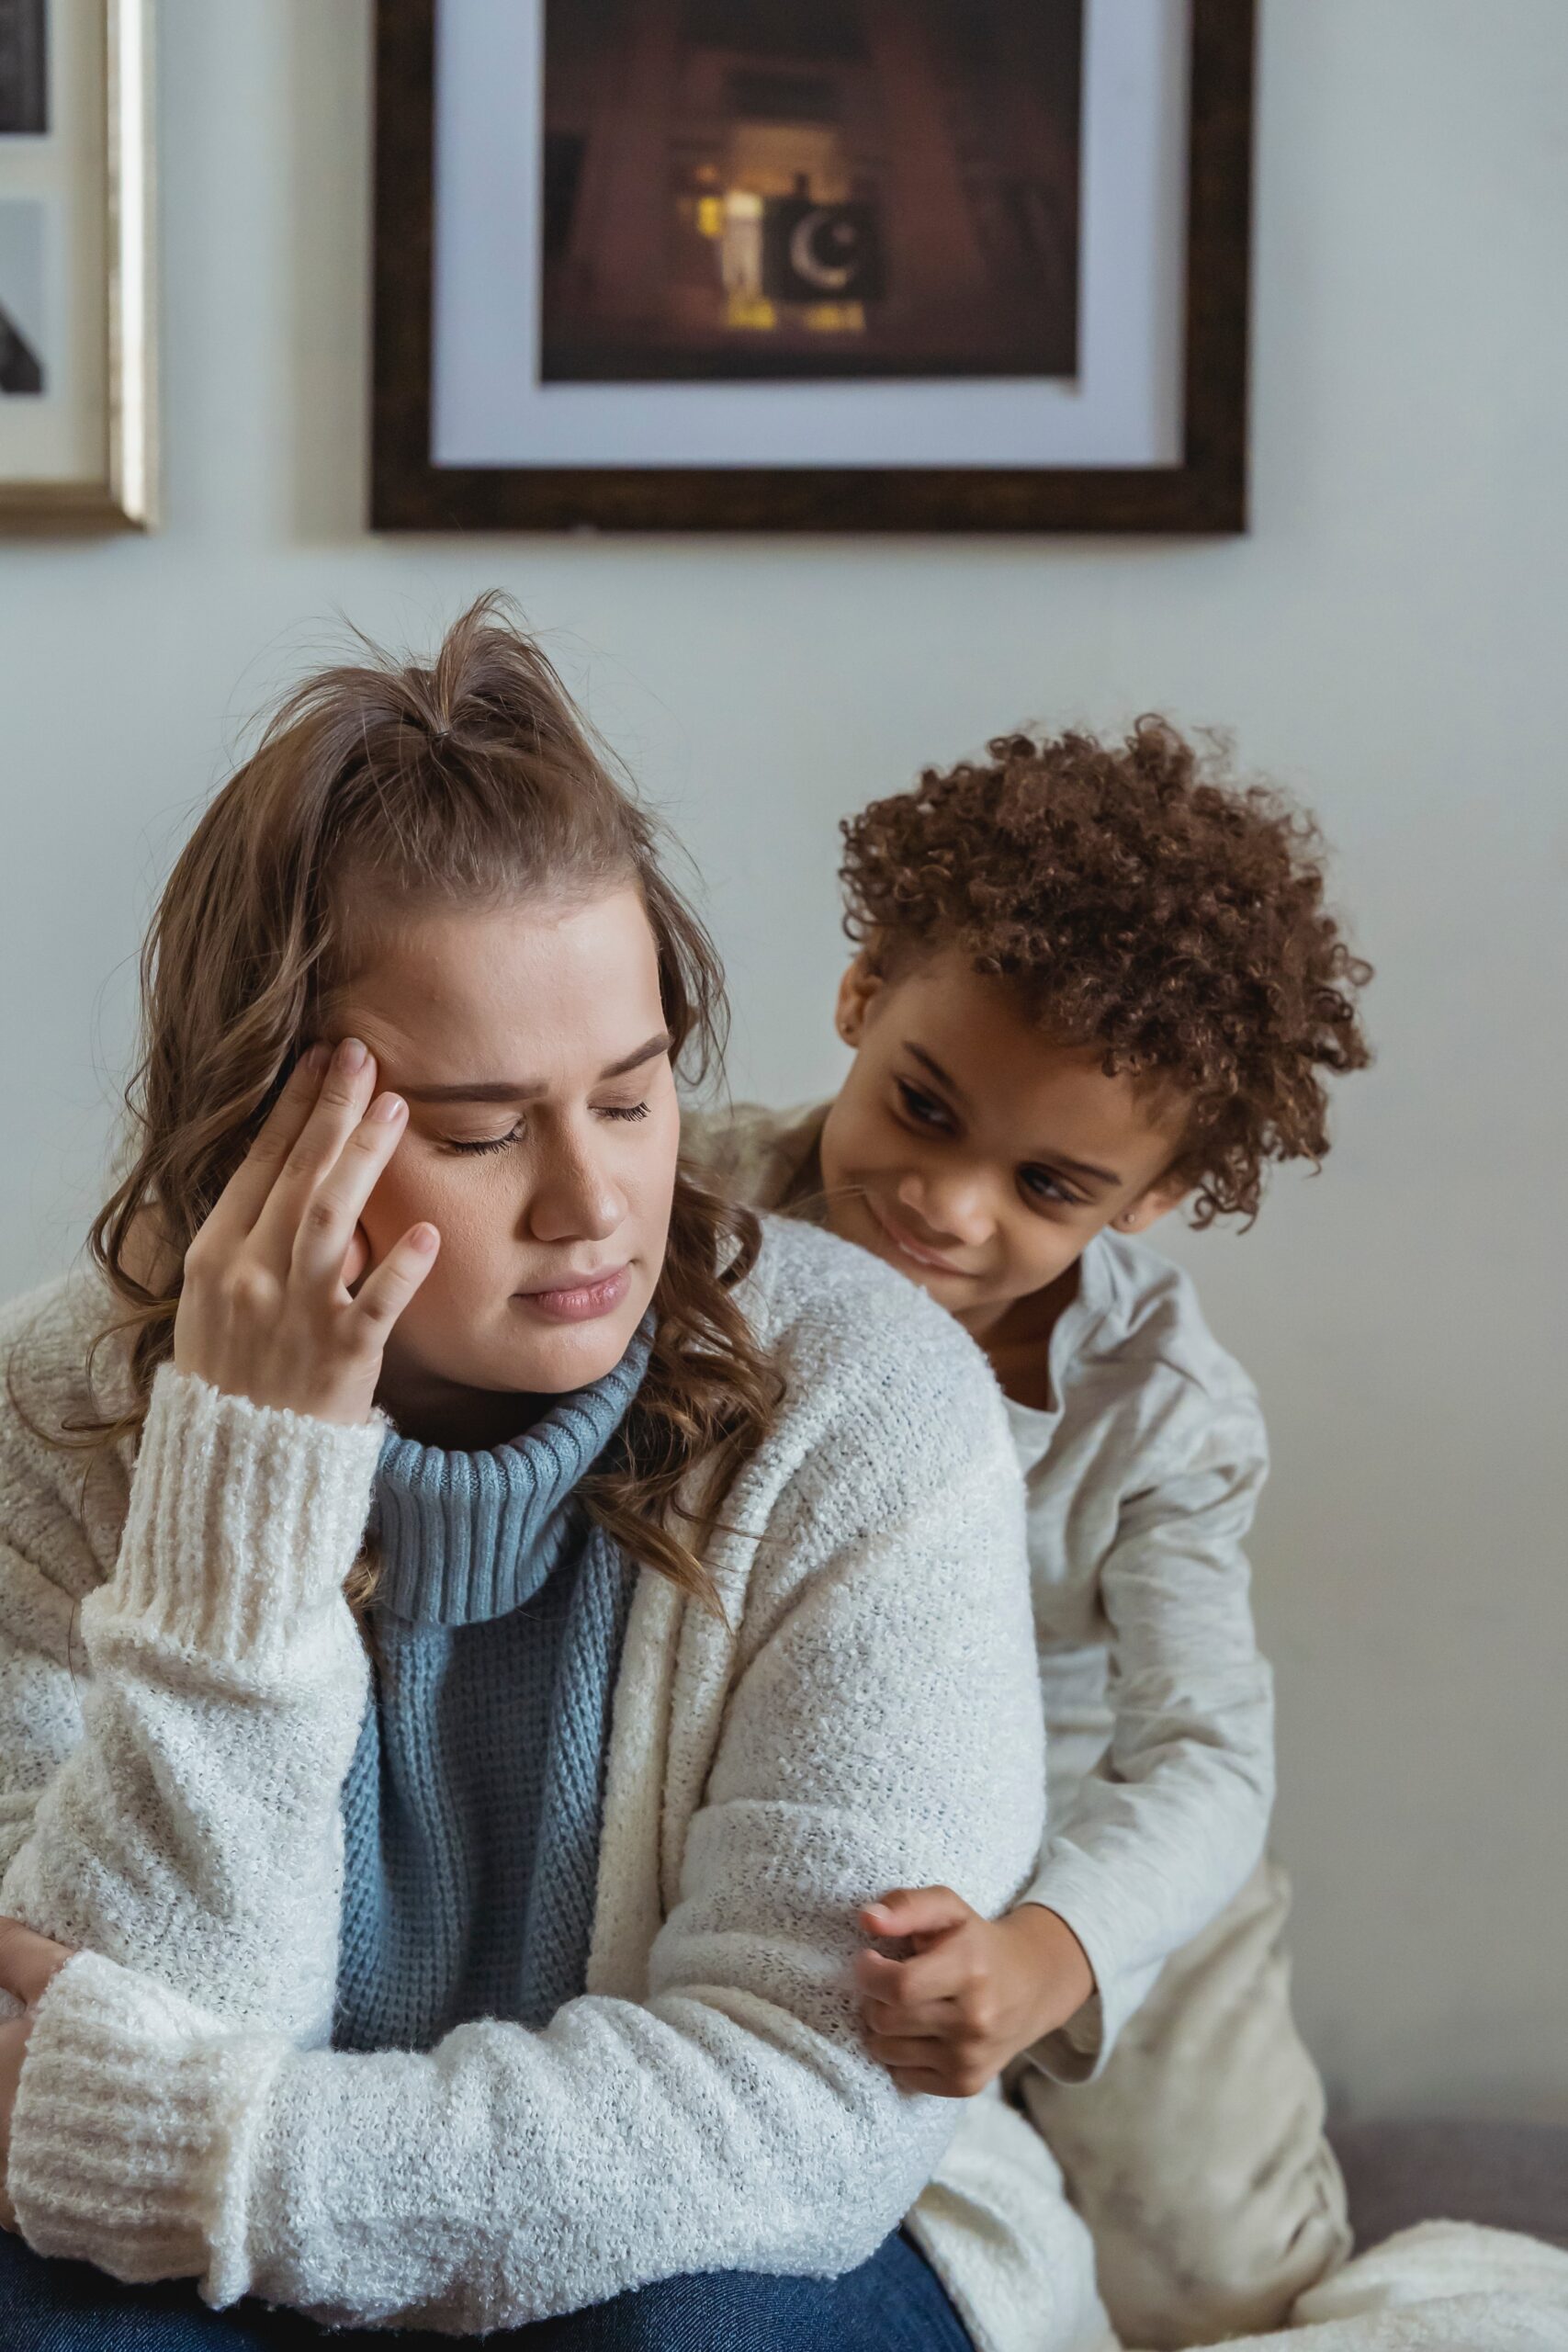 Parenting Stress Try These Tried-and-True Coping Techniques